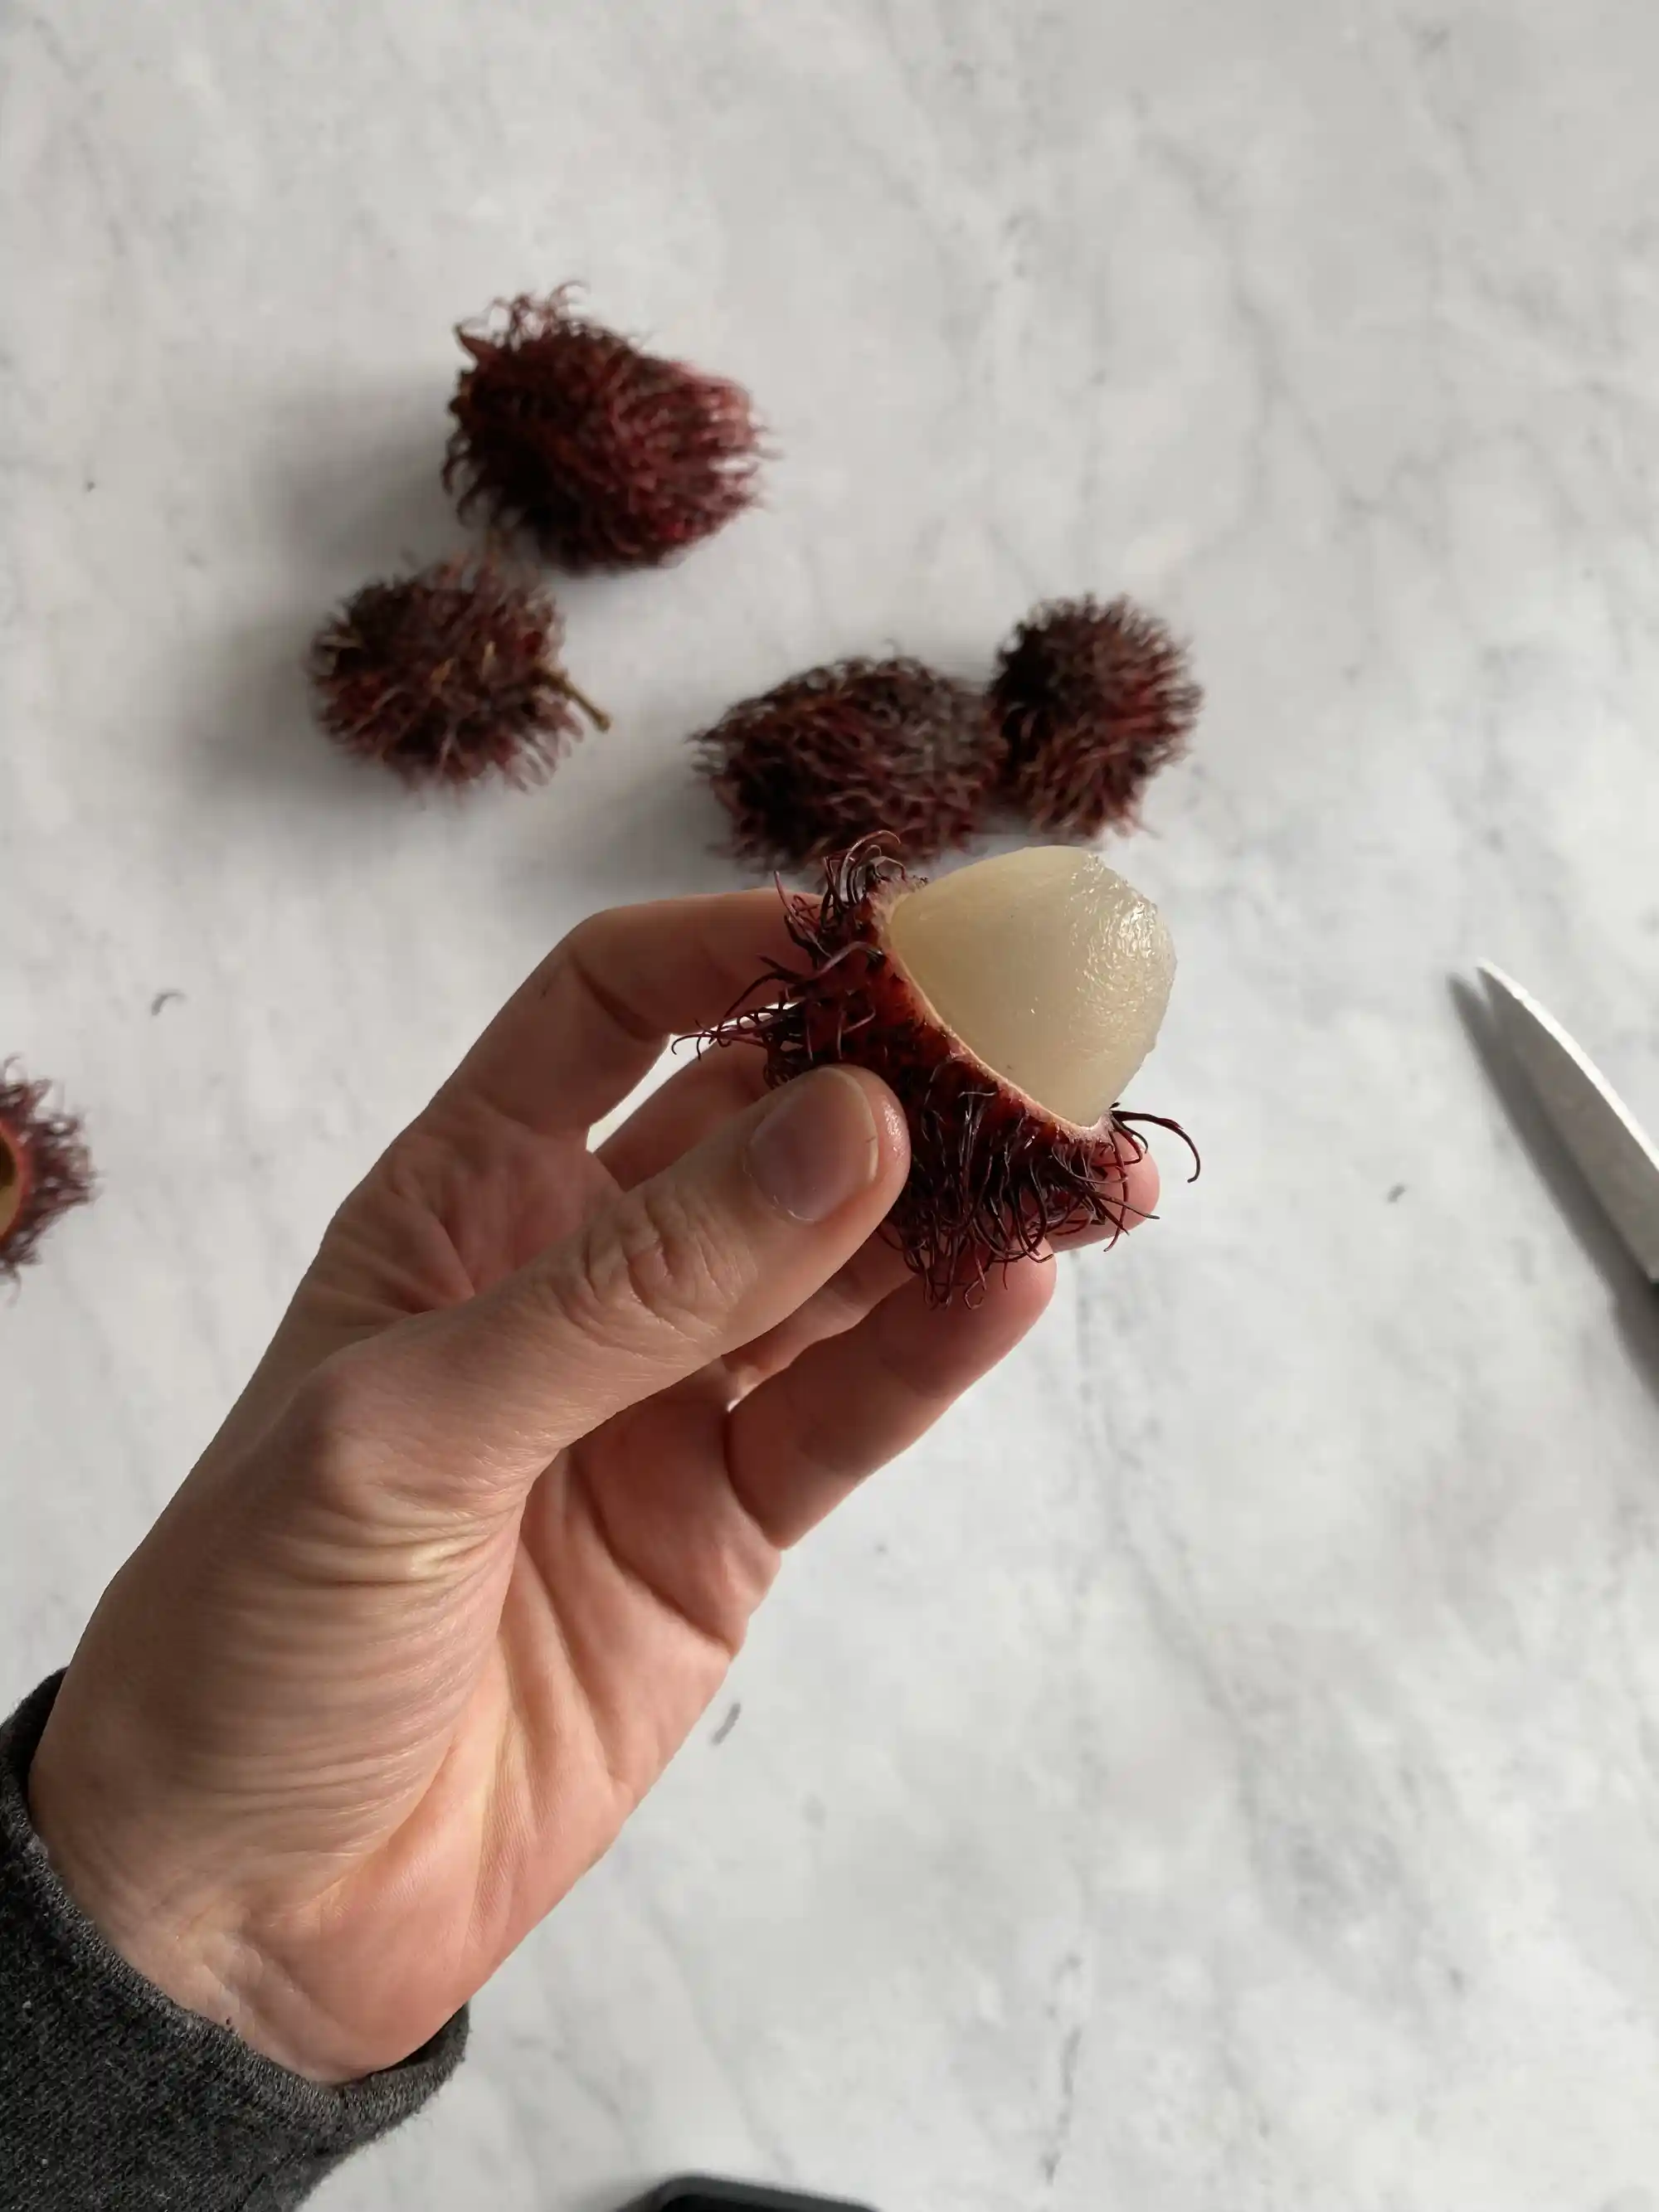 hand holding a single rambutan fruit, whose skin has been sliced across the equator to expose a pale white fruit inside